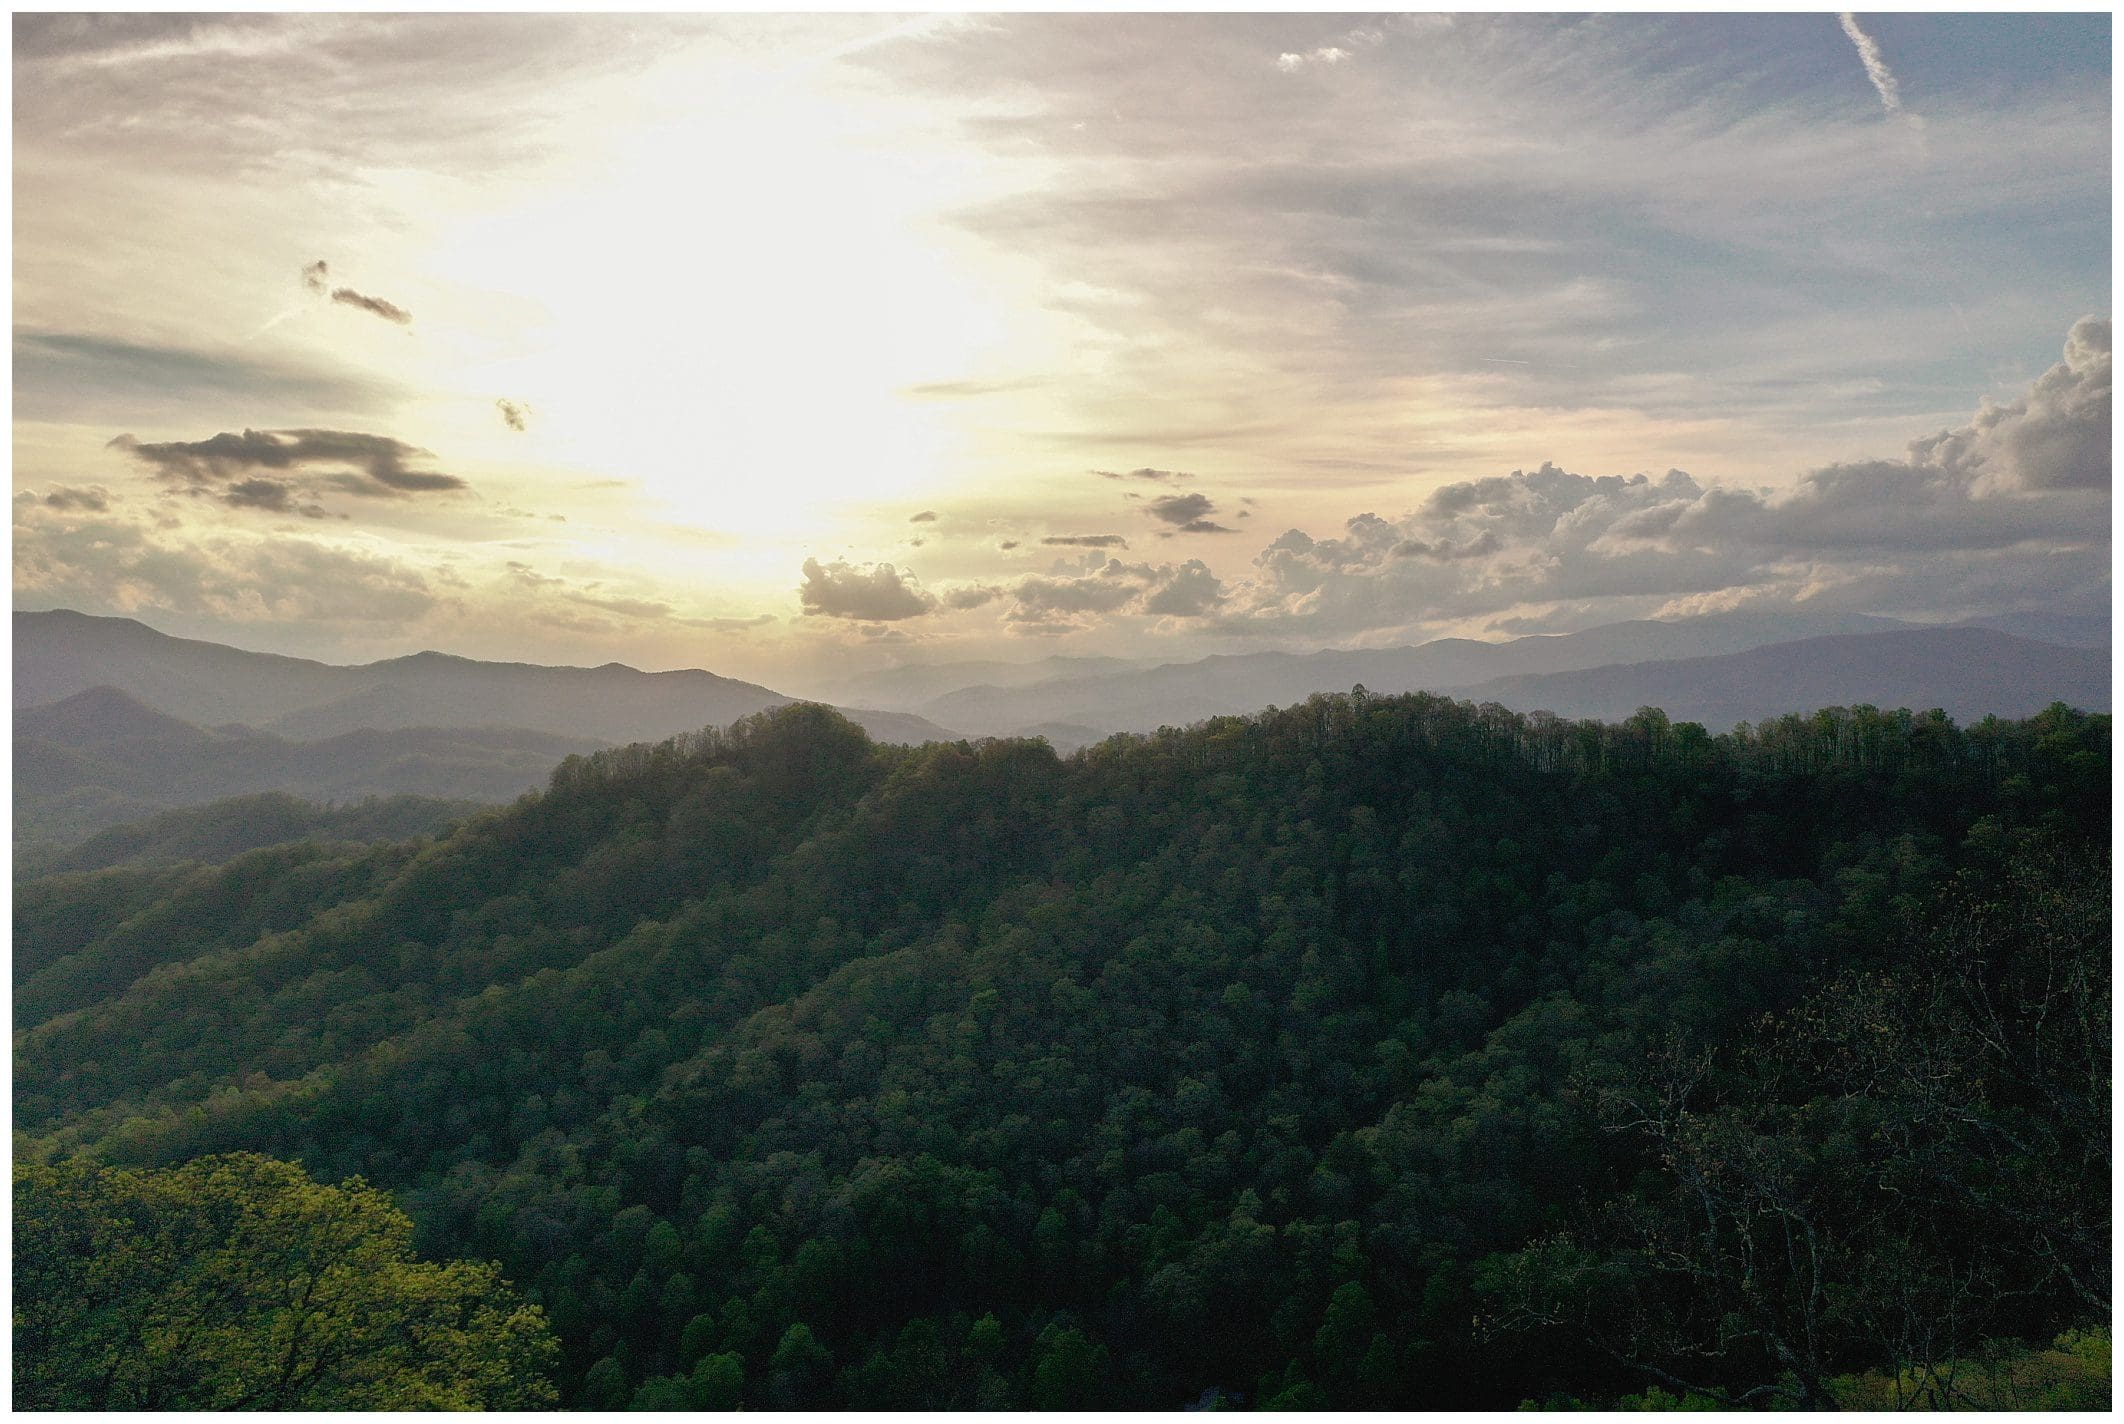 Aerial view of a forest-covered mountain range at sunset, with rays of sunlight breaking through the clouds.